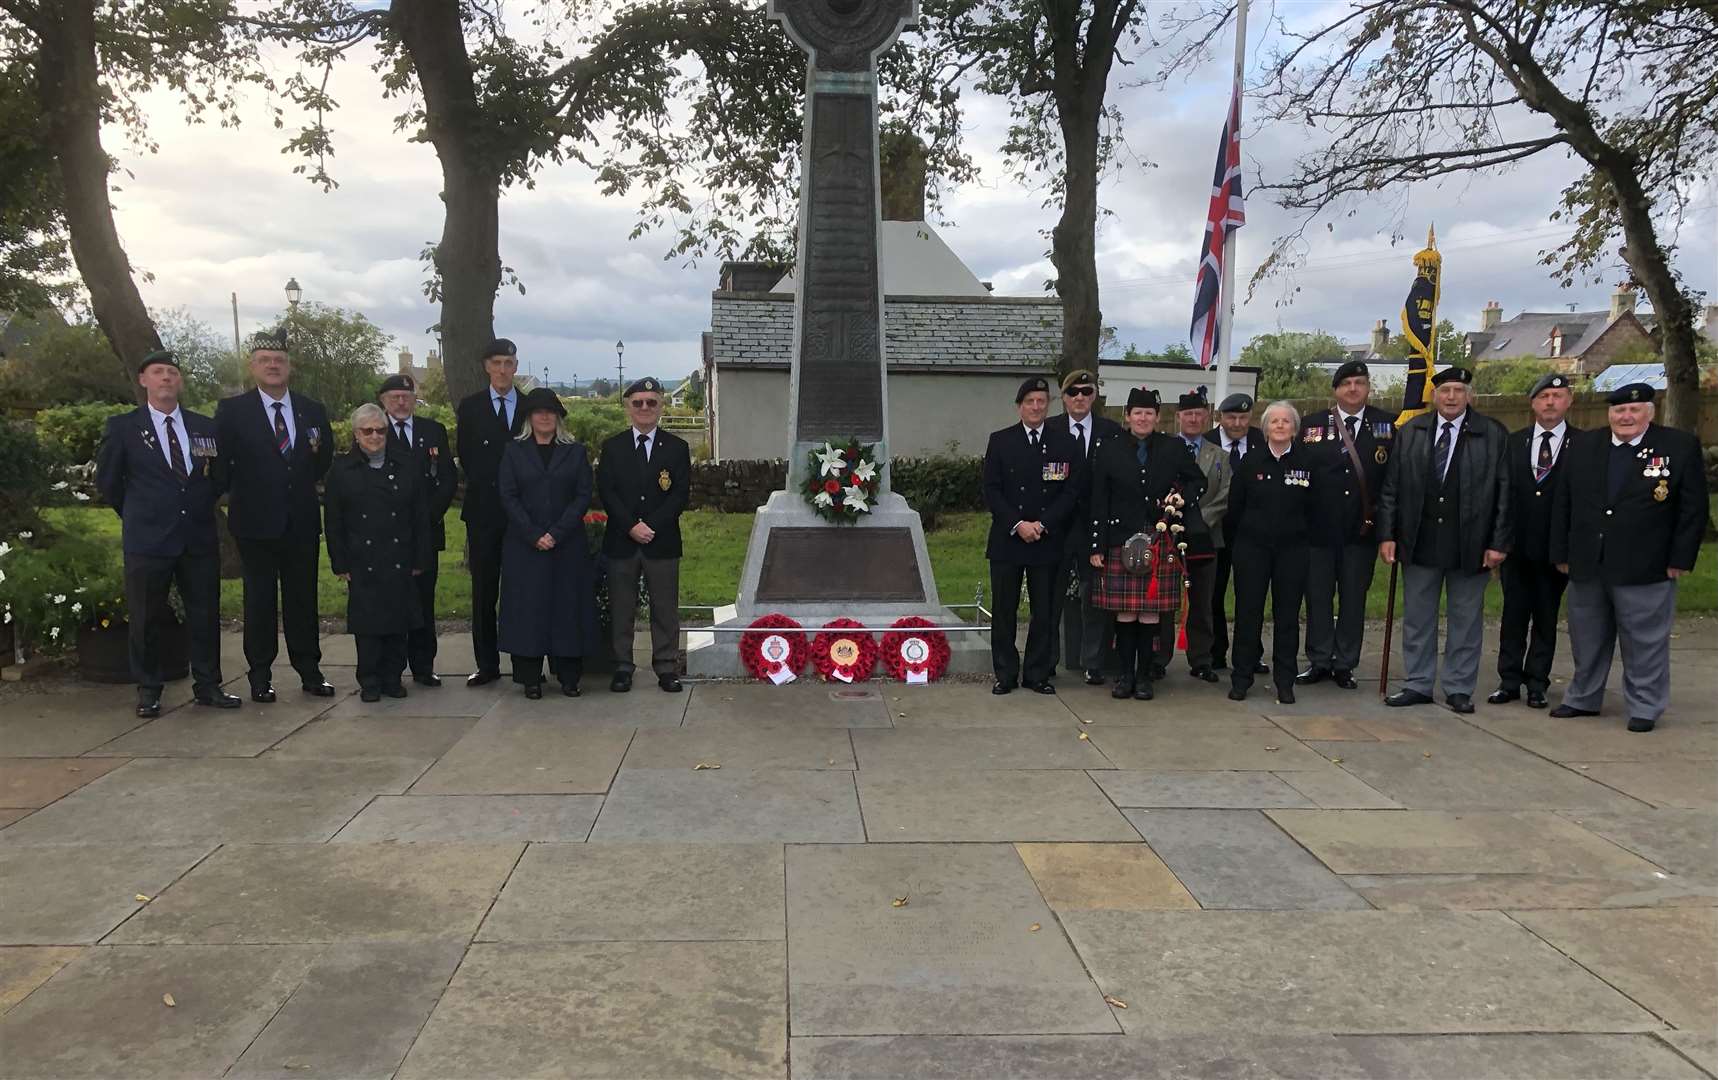 RBLS Golspie branch secretary Kenny McAulay said: “Veterans and their families gathered to say farewell to our Commander in Chief, the “Boss”.